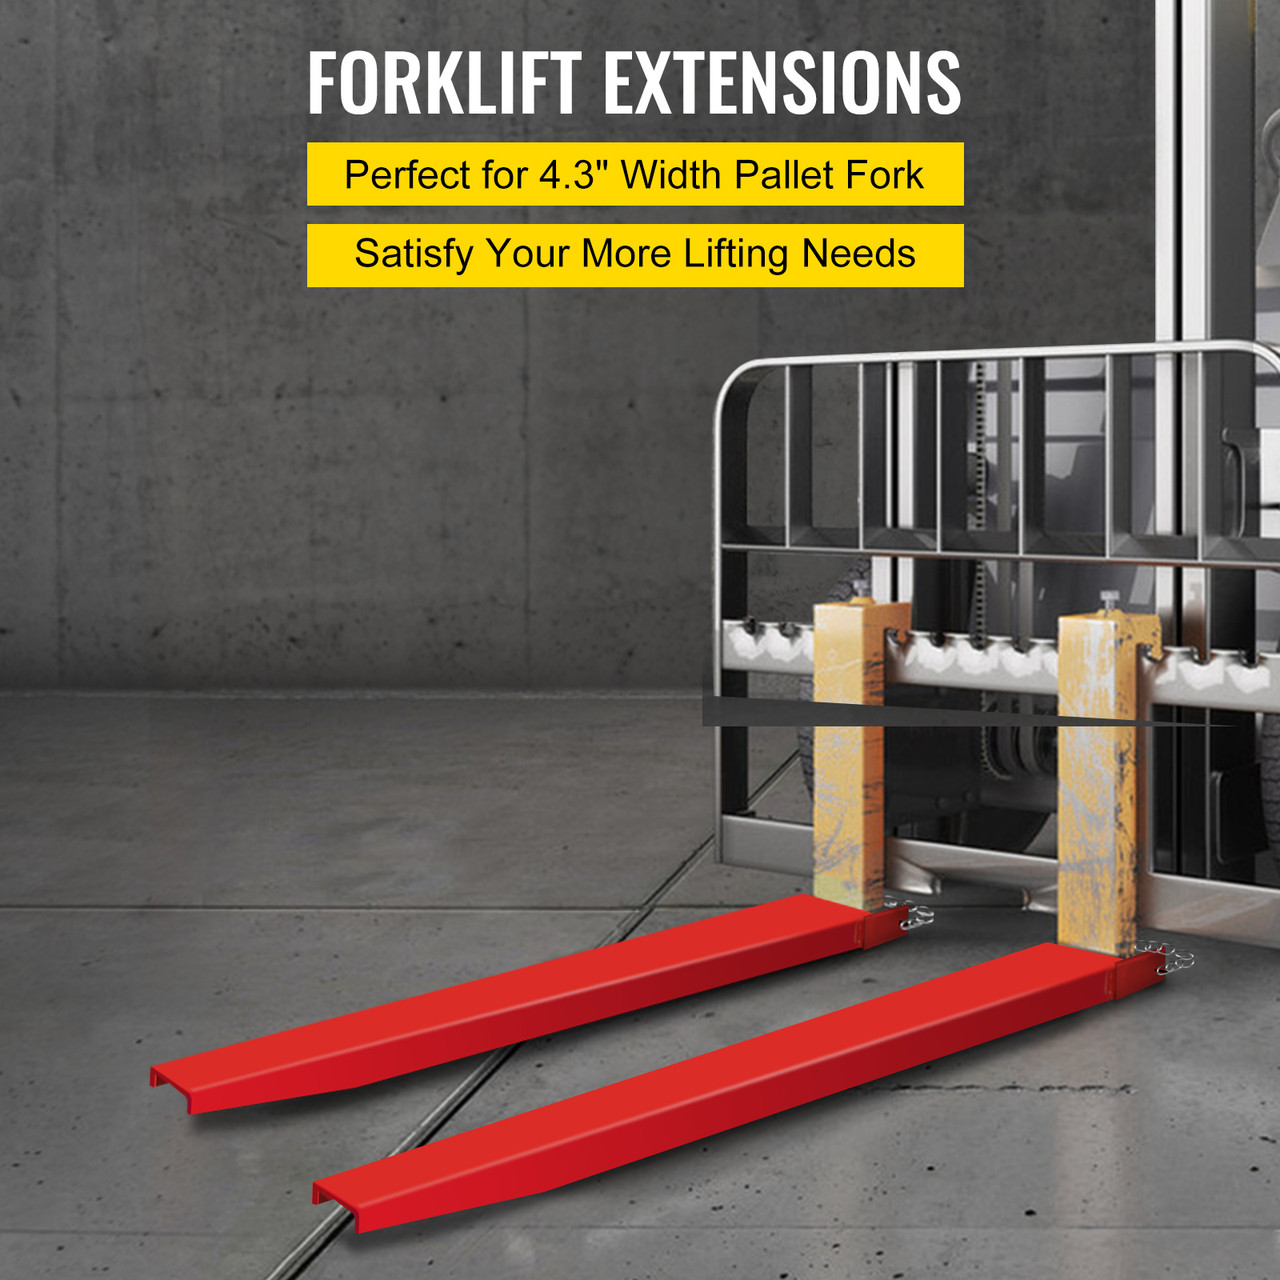 84x4'' Forklift Pallet Fork Extensions Pair Steel Great Lift Truck